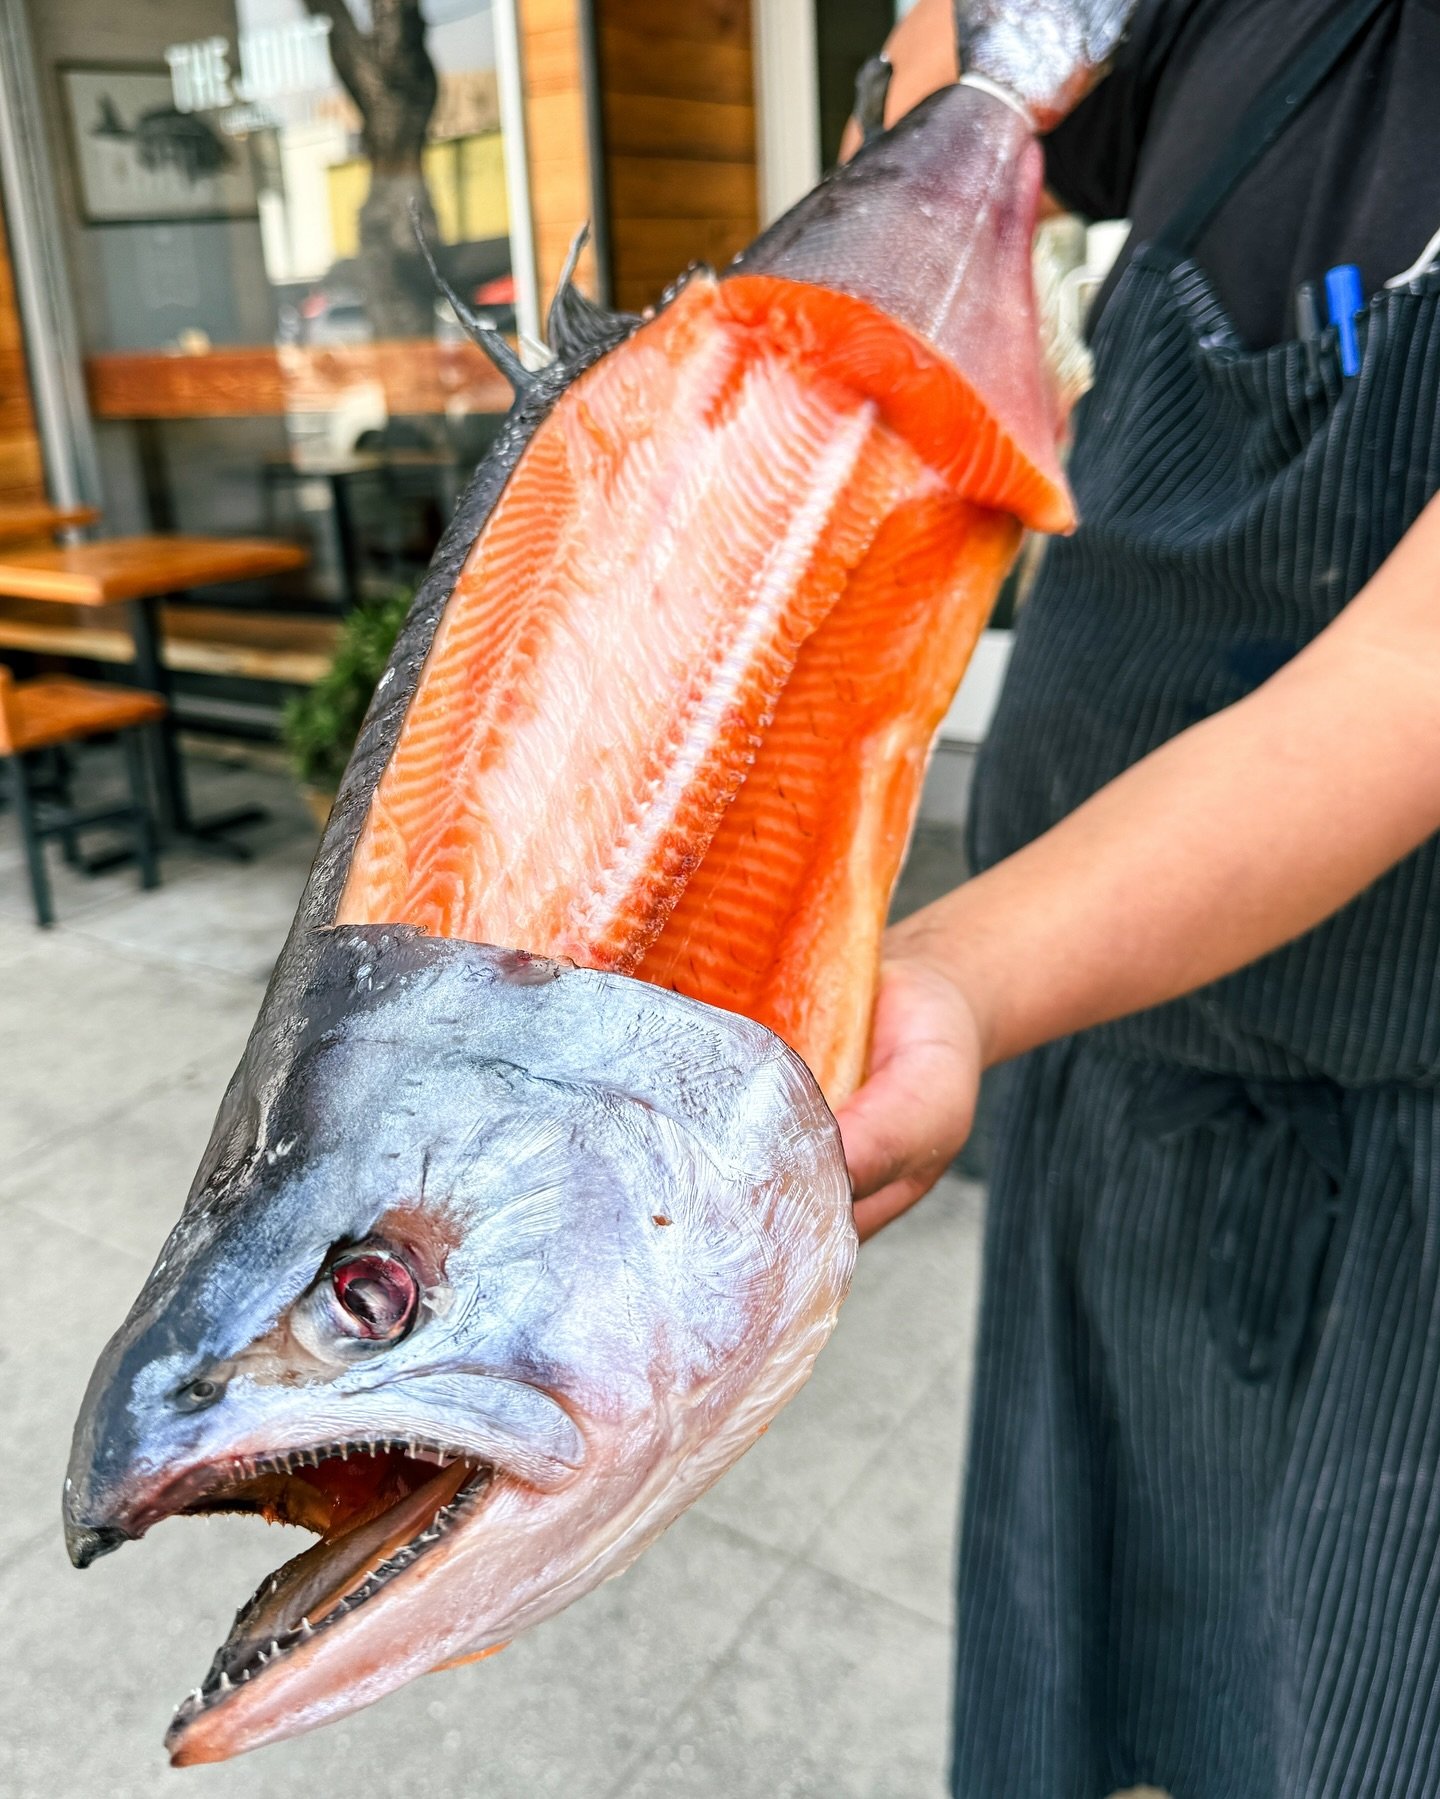 Did you know every @orakingsalmon is carefully sourced from New Zealand King Salmon, the leader in Chinook aquaculture of the world. Touting 30+ years of environmentally responsible husbandry practices and breeding expertise, only the best salmon are